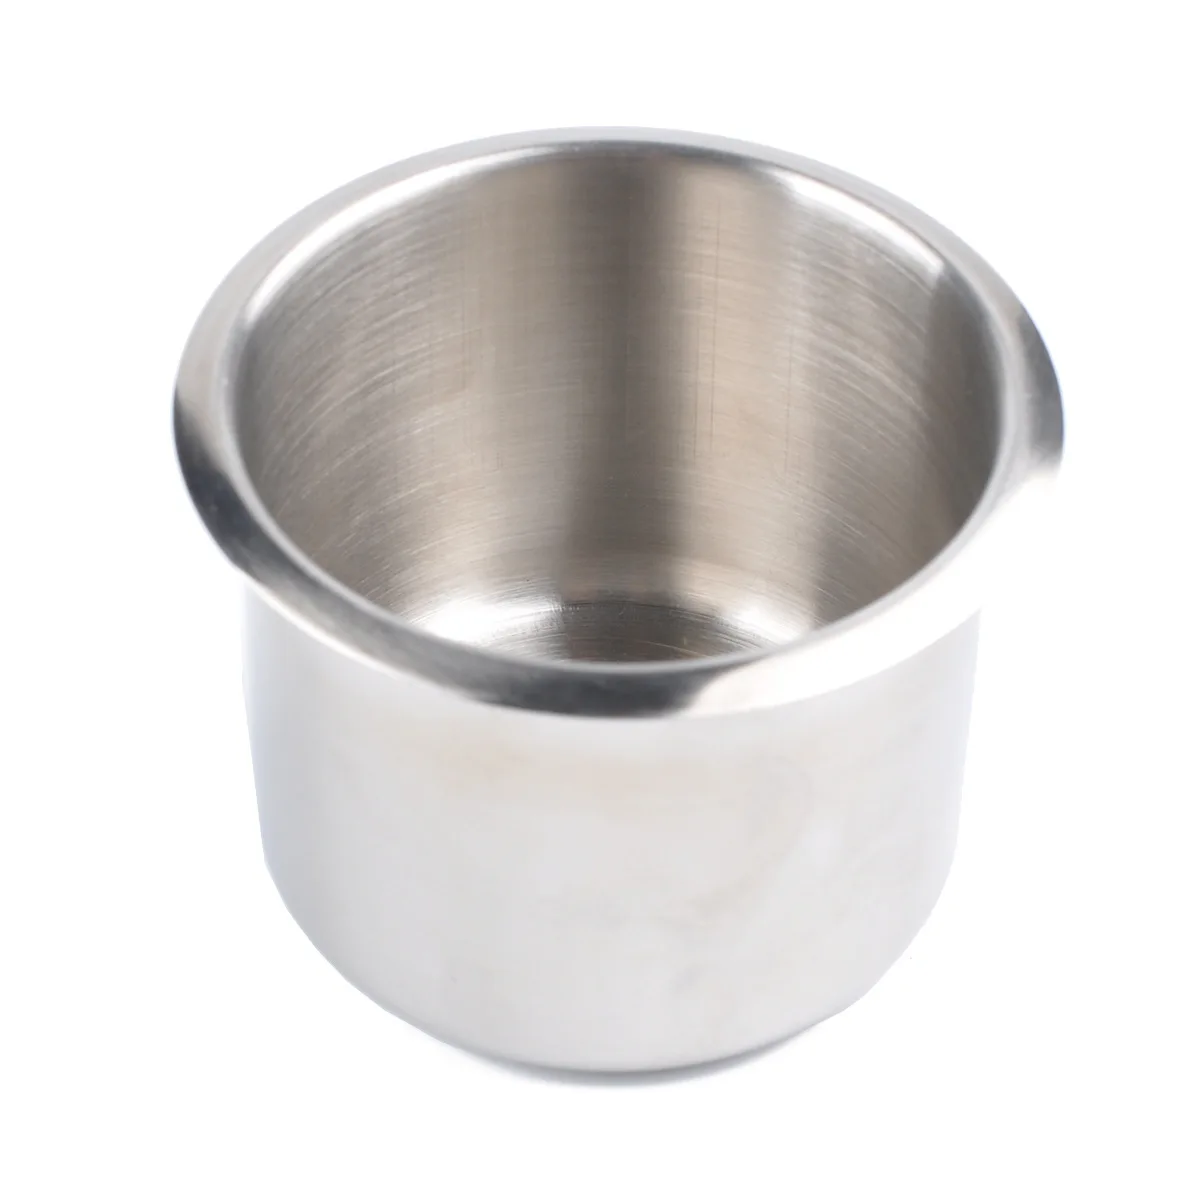 Car Cup Holder Stainless Steel Recessed Water Cup Drink Holder RV Accessories cow stainless steel water bowl no drain hole drink automatic float farming trough horse supplie sheep goat cattle